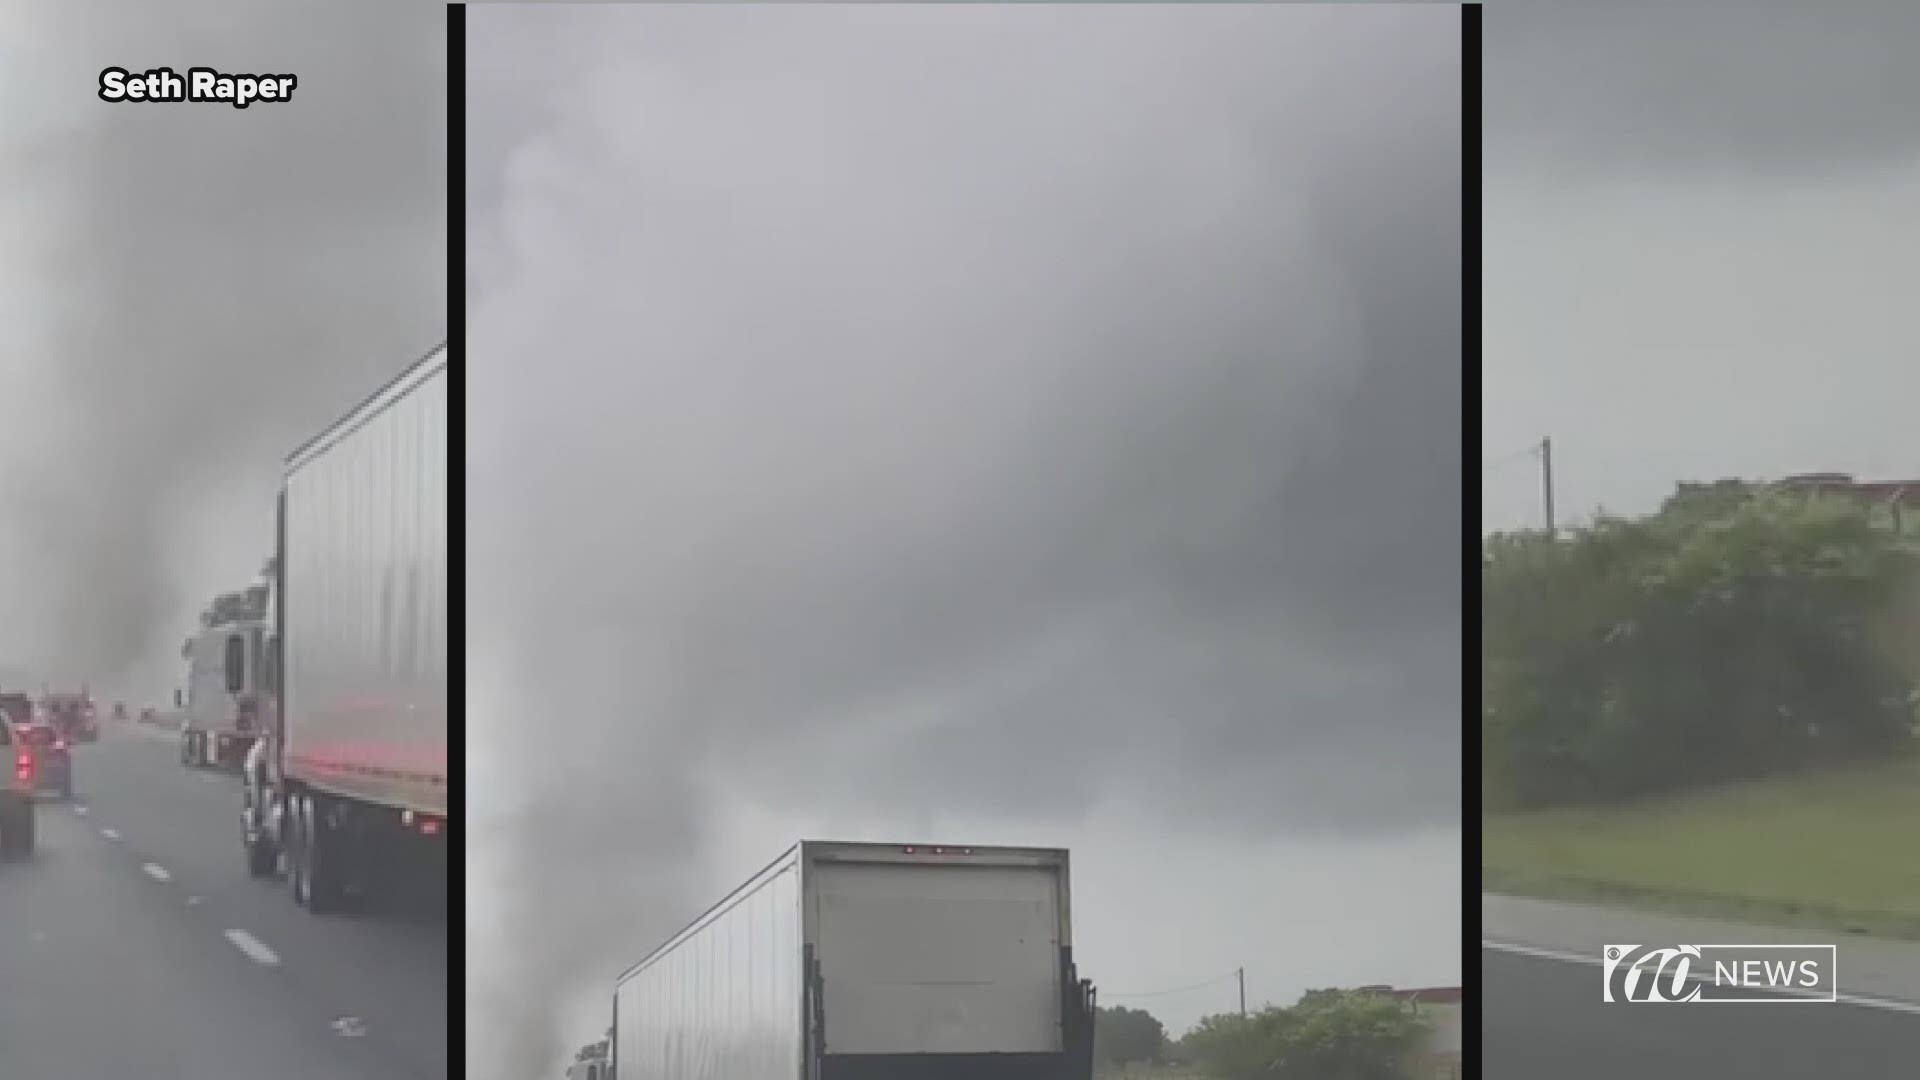 A driver captured video of a possible tornado on I-75 near Wildwood. The National Weather Service is working to officially confirm any tornadoes from today's storms.